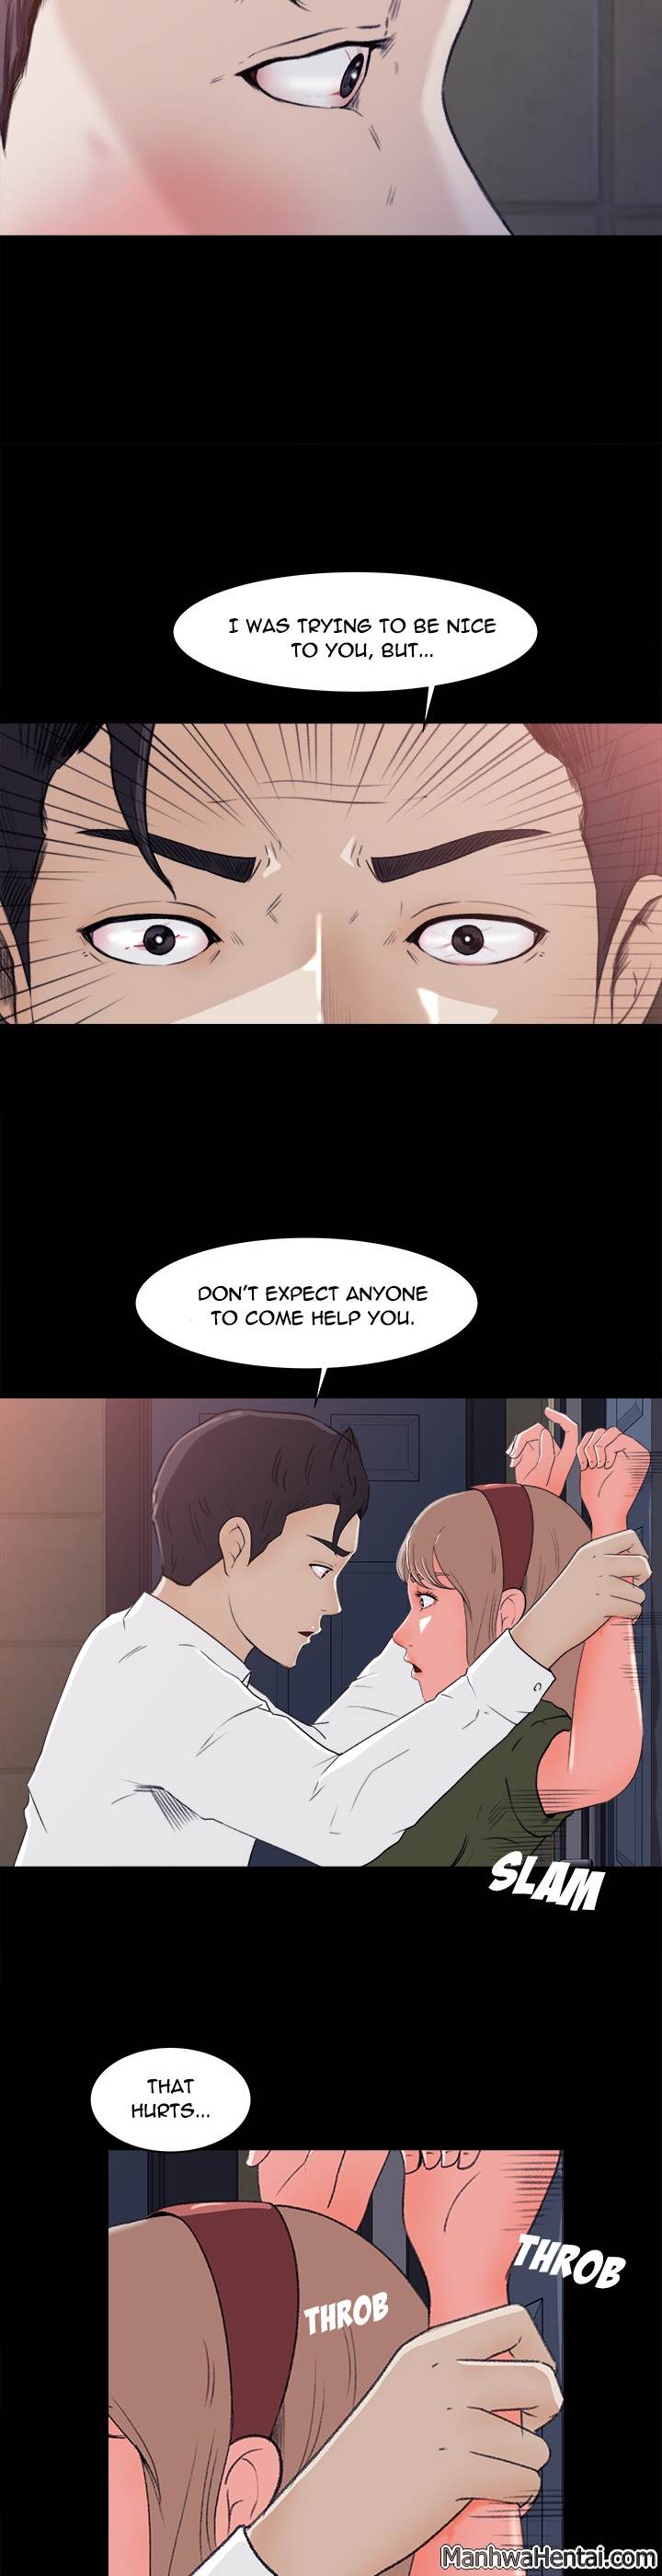 Inside the Uniform - Chapter 4 Page 12